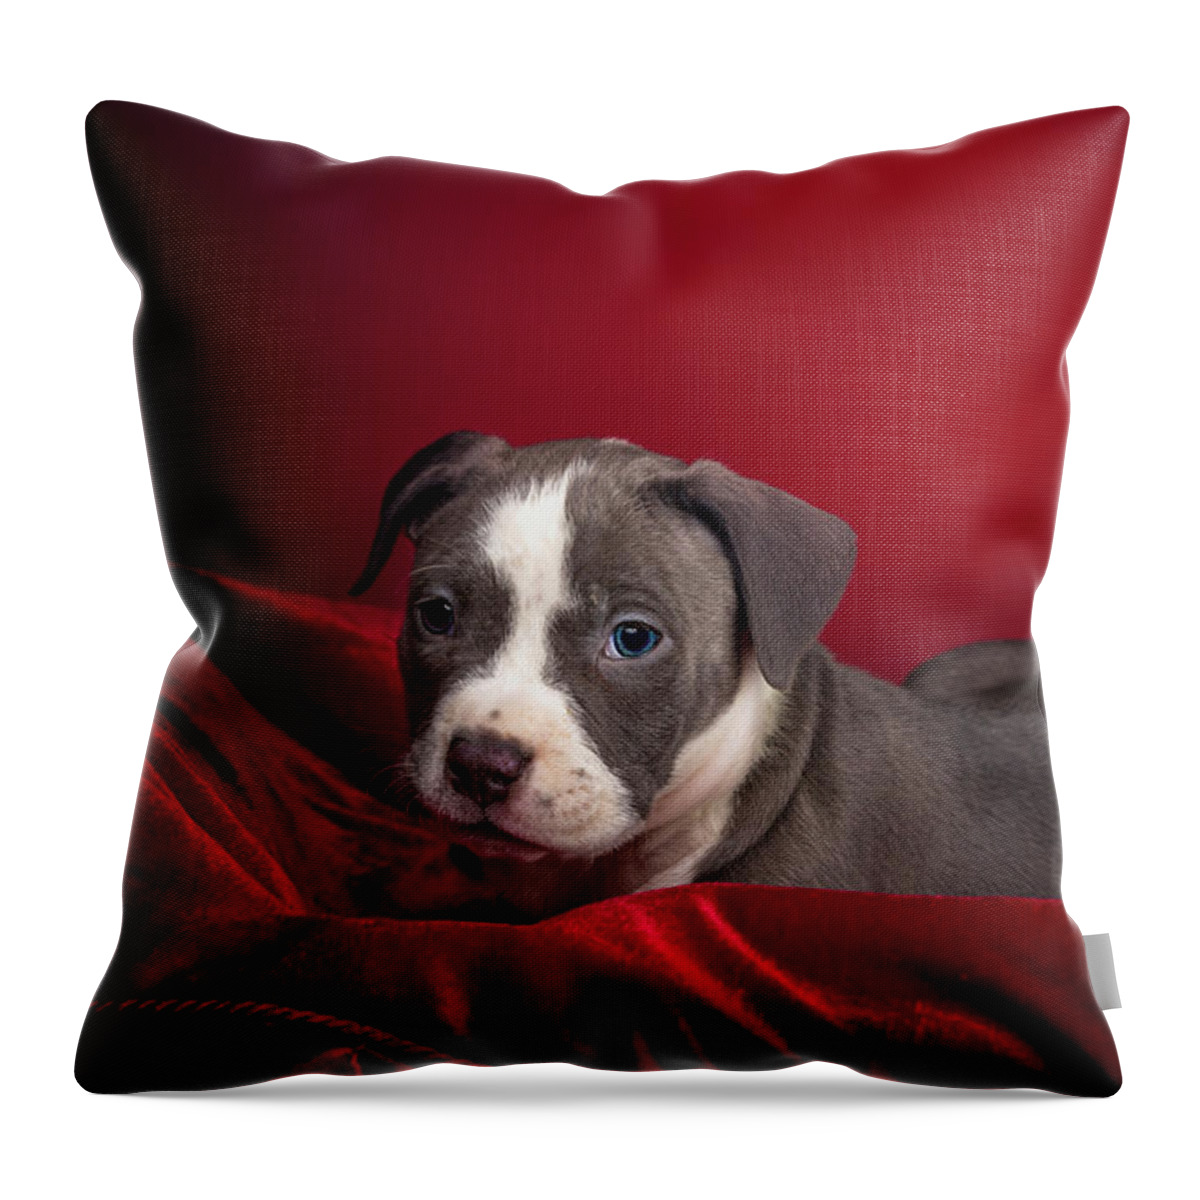 Adorable Throw Pillow featuring the photograph American Pitbull Puppy by Peter Lakomy